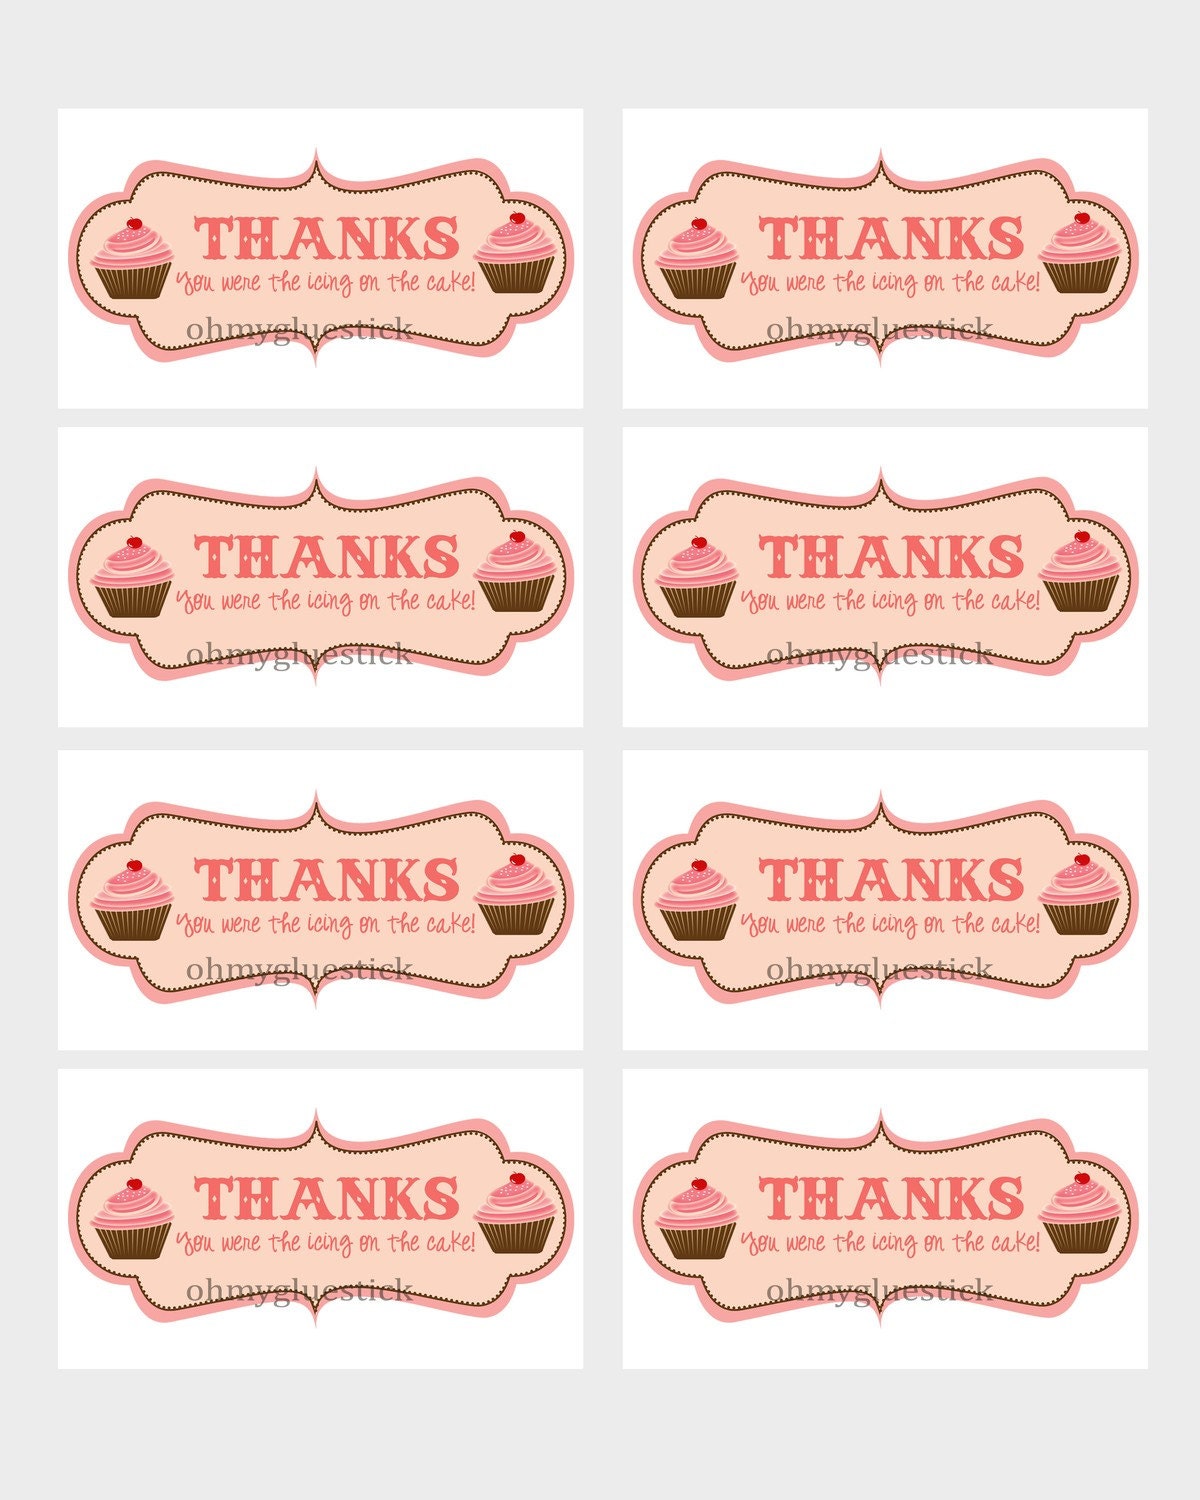 cupcake-thank-you-printable-labels-by-ohmygluestick-on-etsy